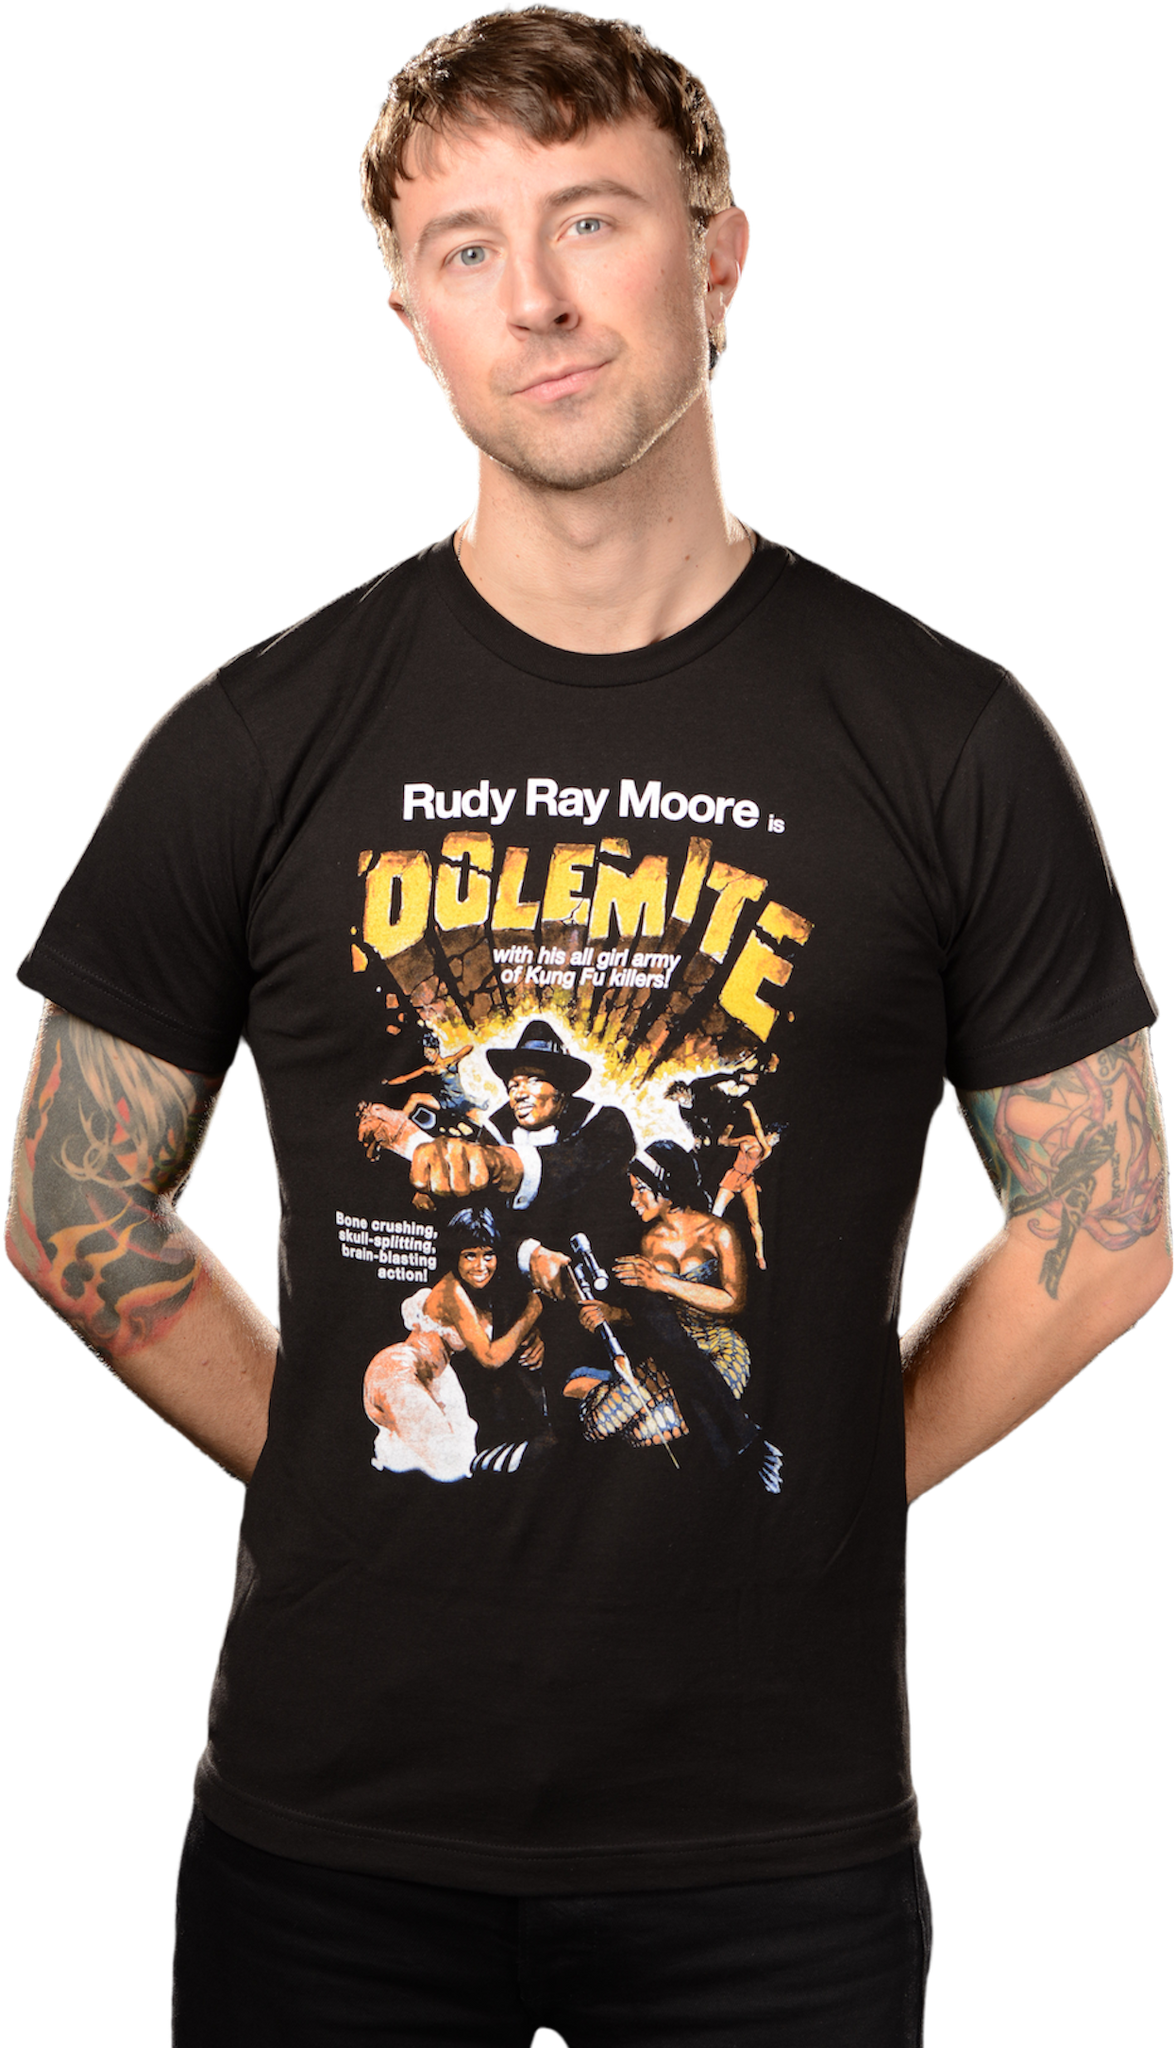 RUDY RAY MOORE IS DOLEMITE T-SHIRT